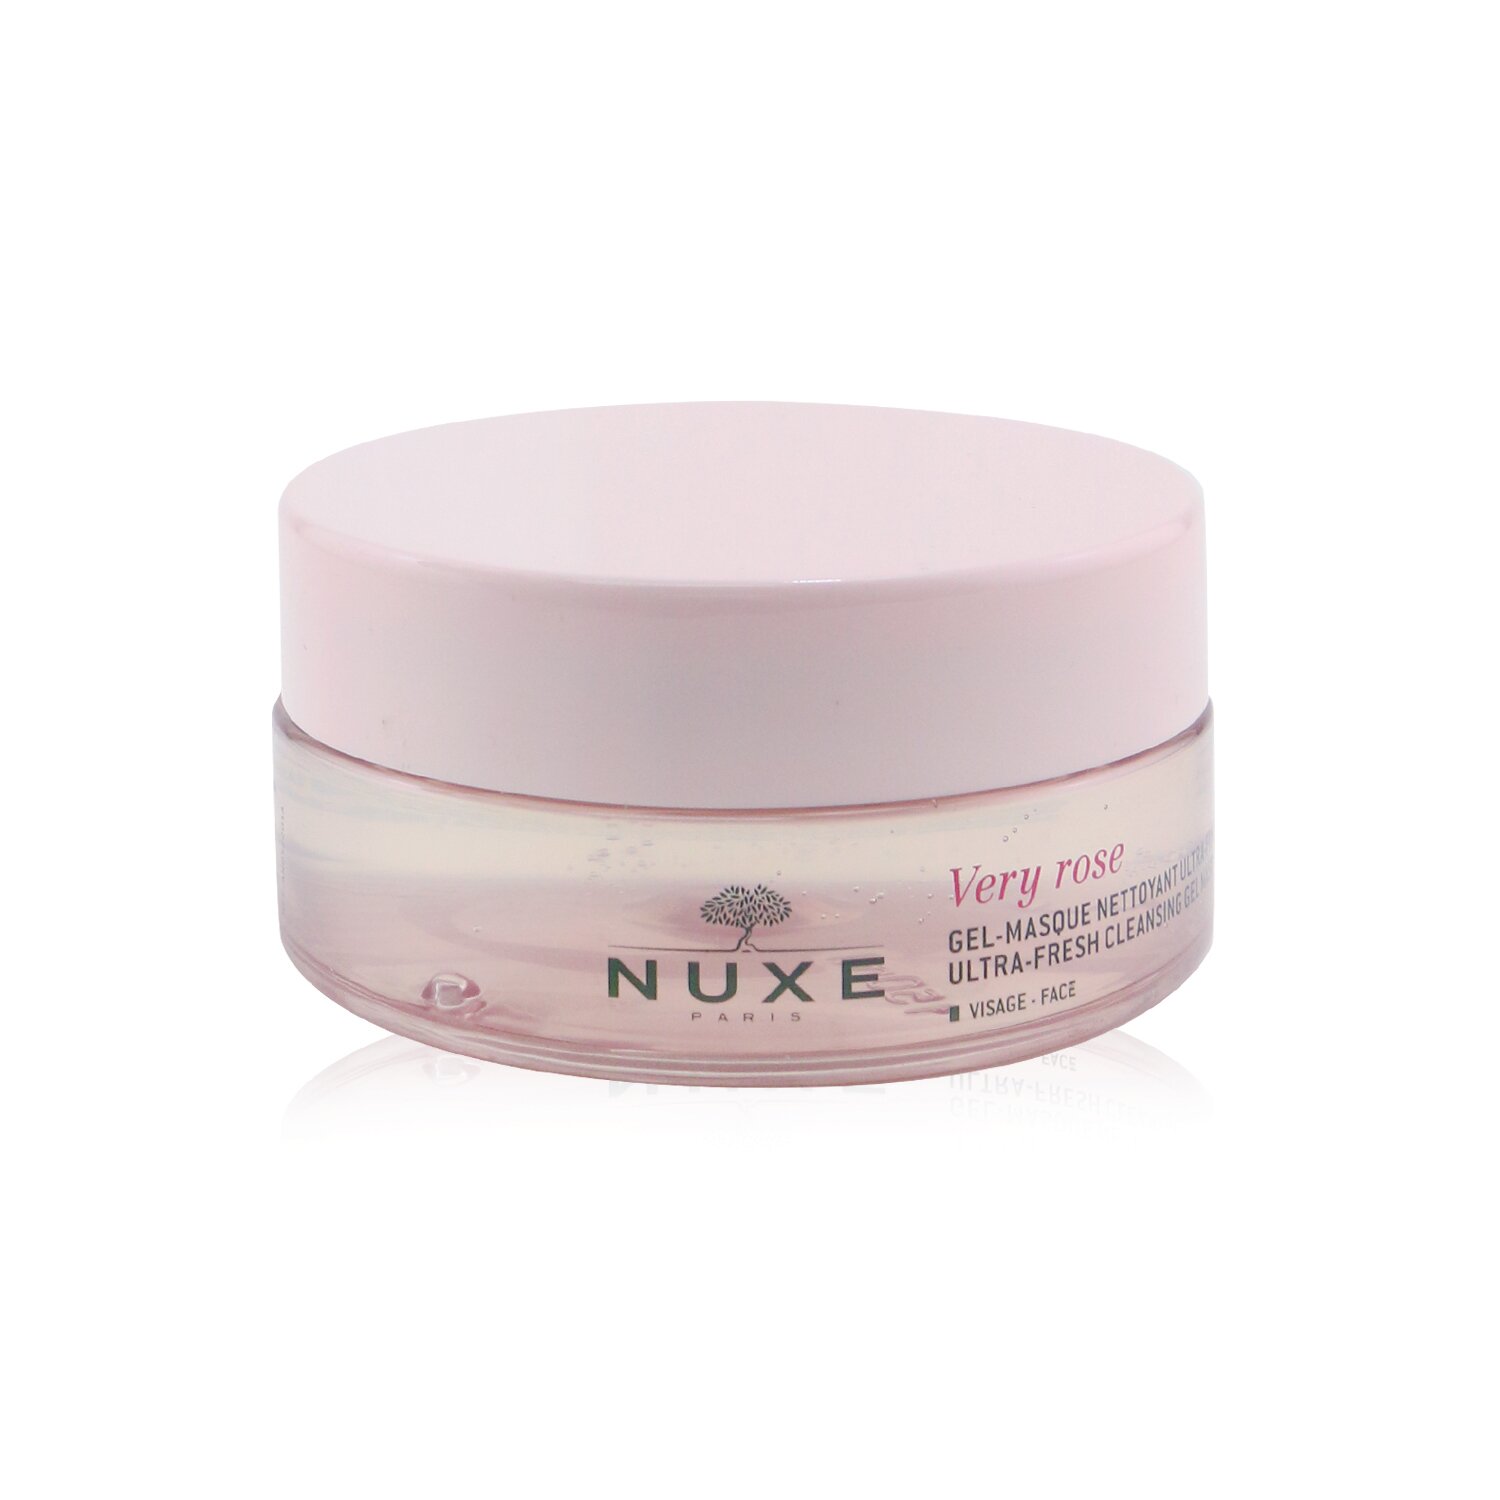 Photos - Facial Mask Nuxe Very Rose Ultra-fresh Cleansing Gel Mask 